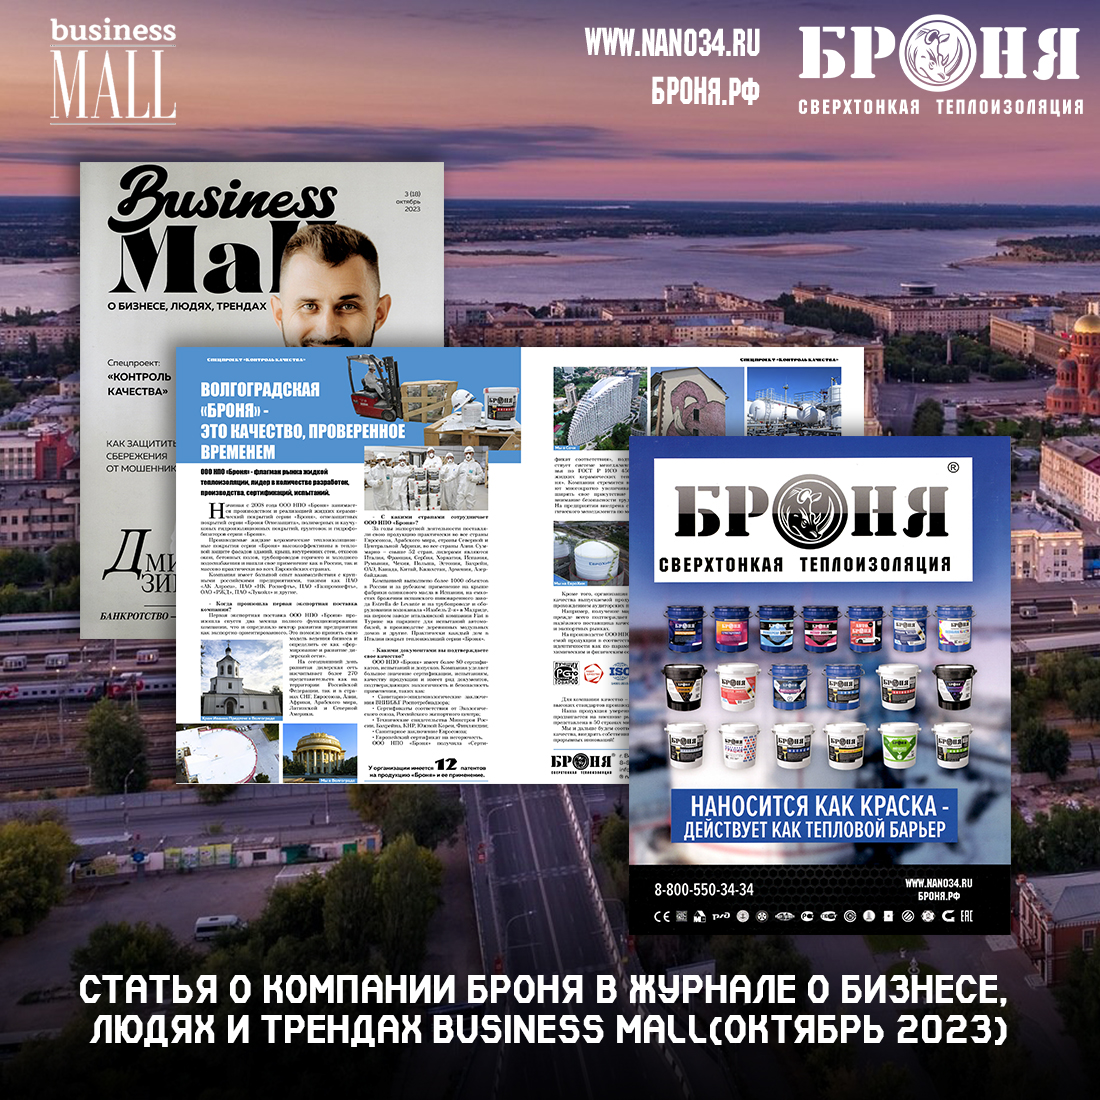 Article about Armor in the magazine about business, people and trends of BUSINESS MALL 